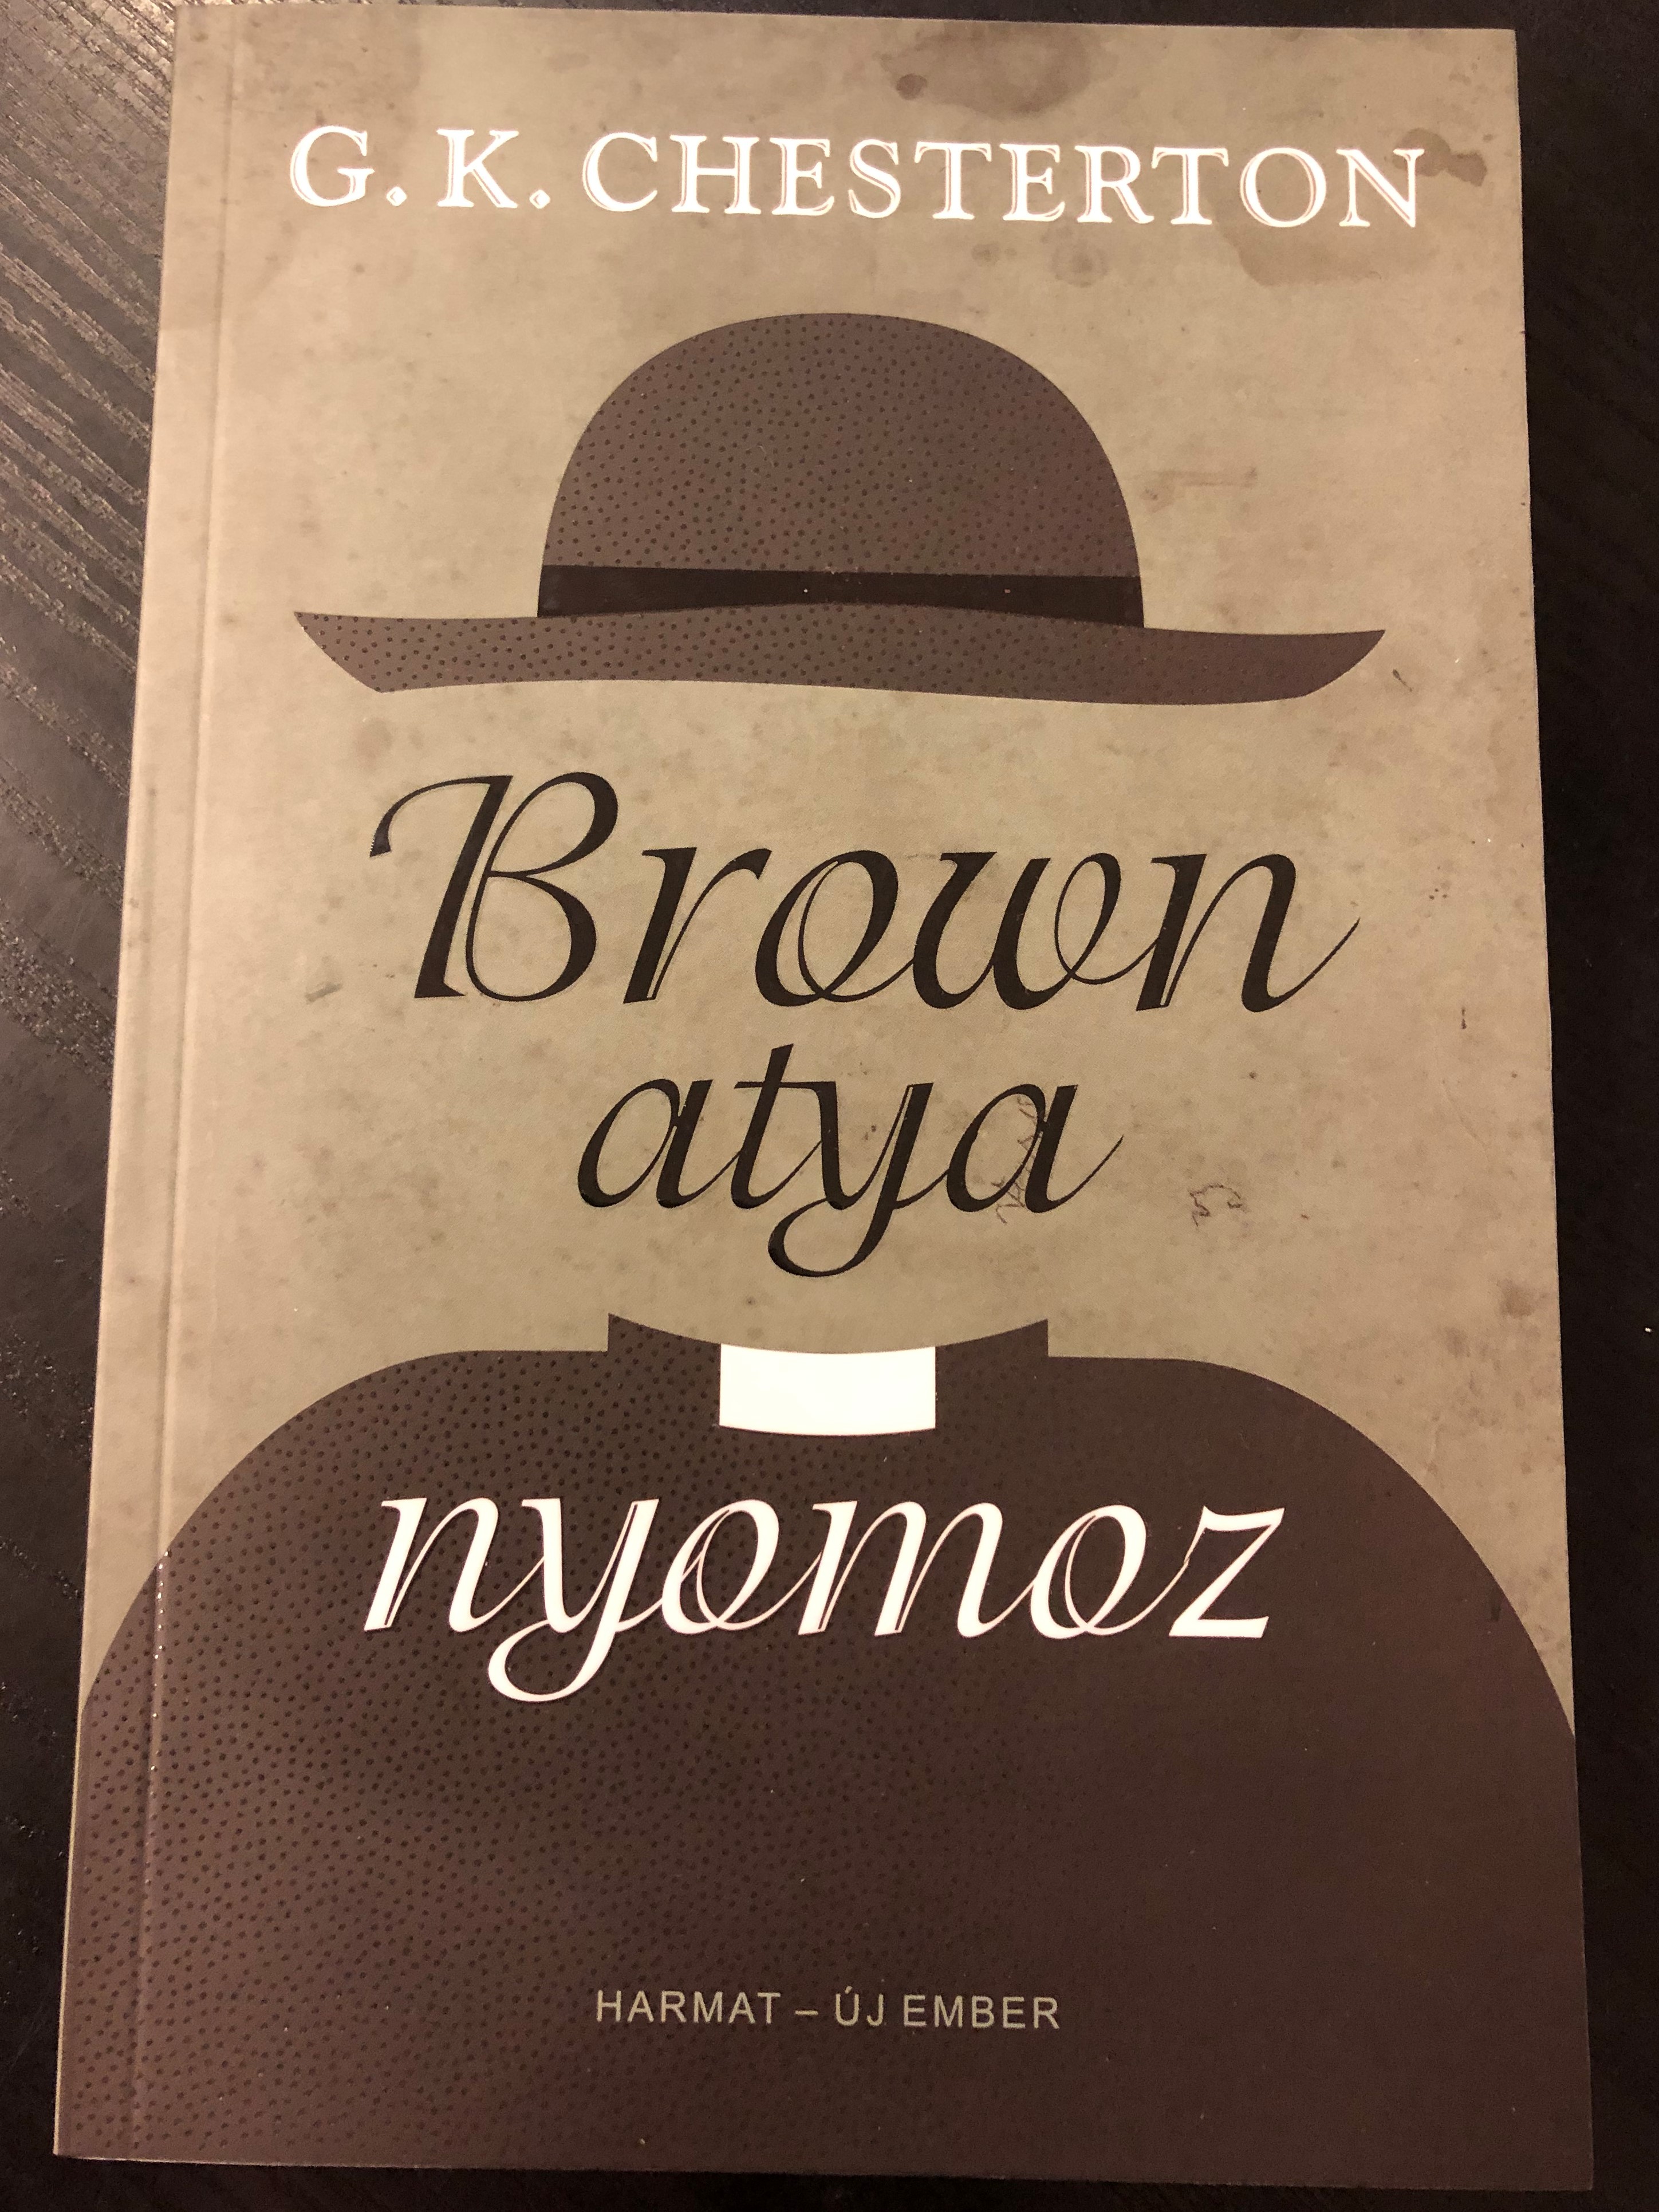 brown-atya-nyomoz-by-g.-k.-chesterton-hungarian-selection-of-works-from-the-complete-father-brown-stories-1.jpg